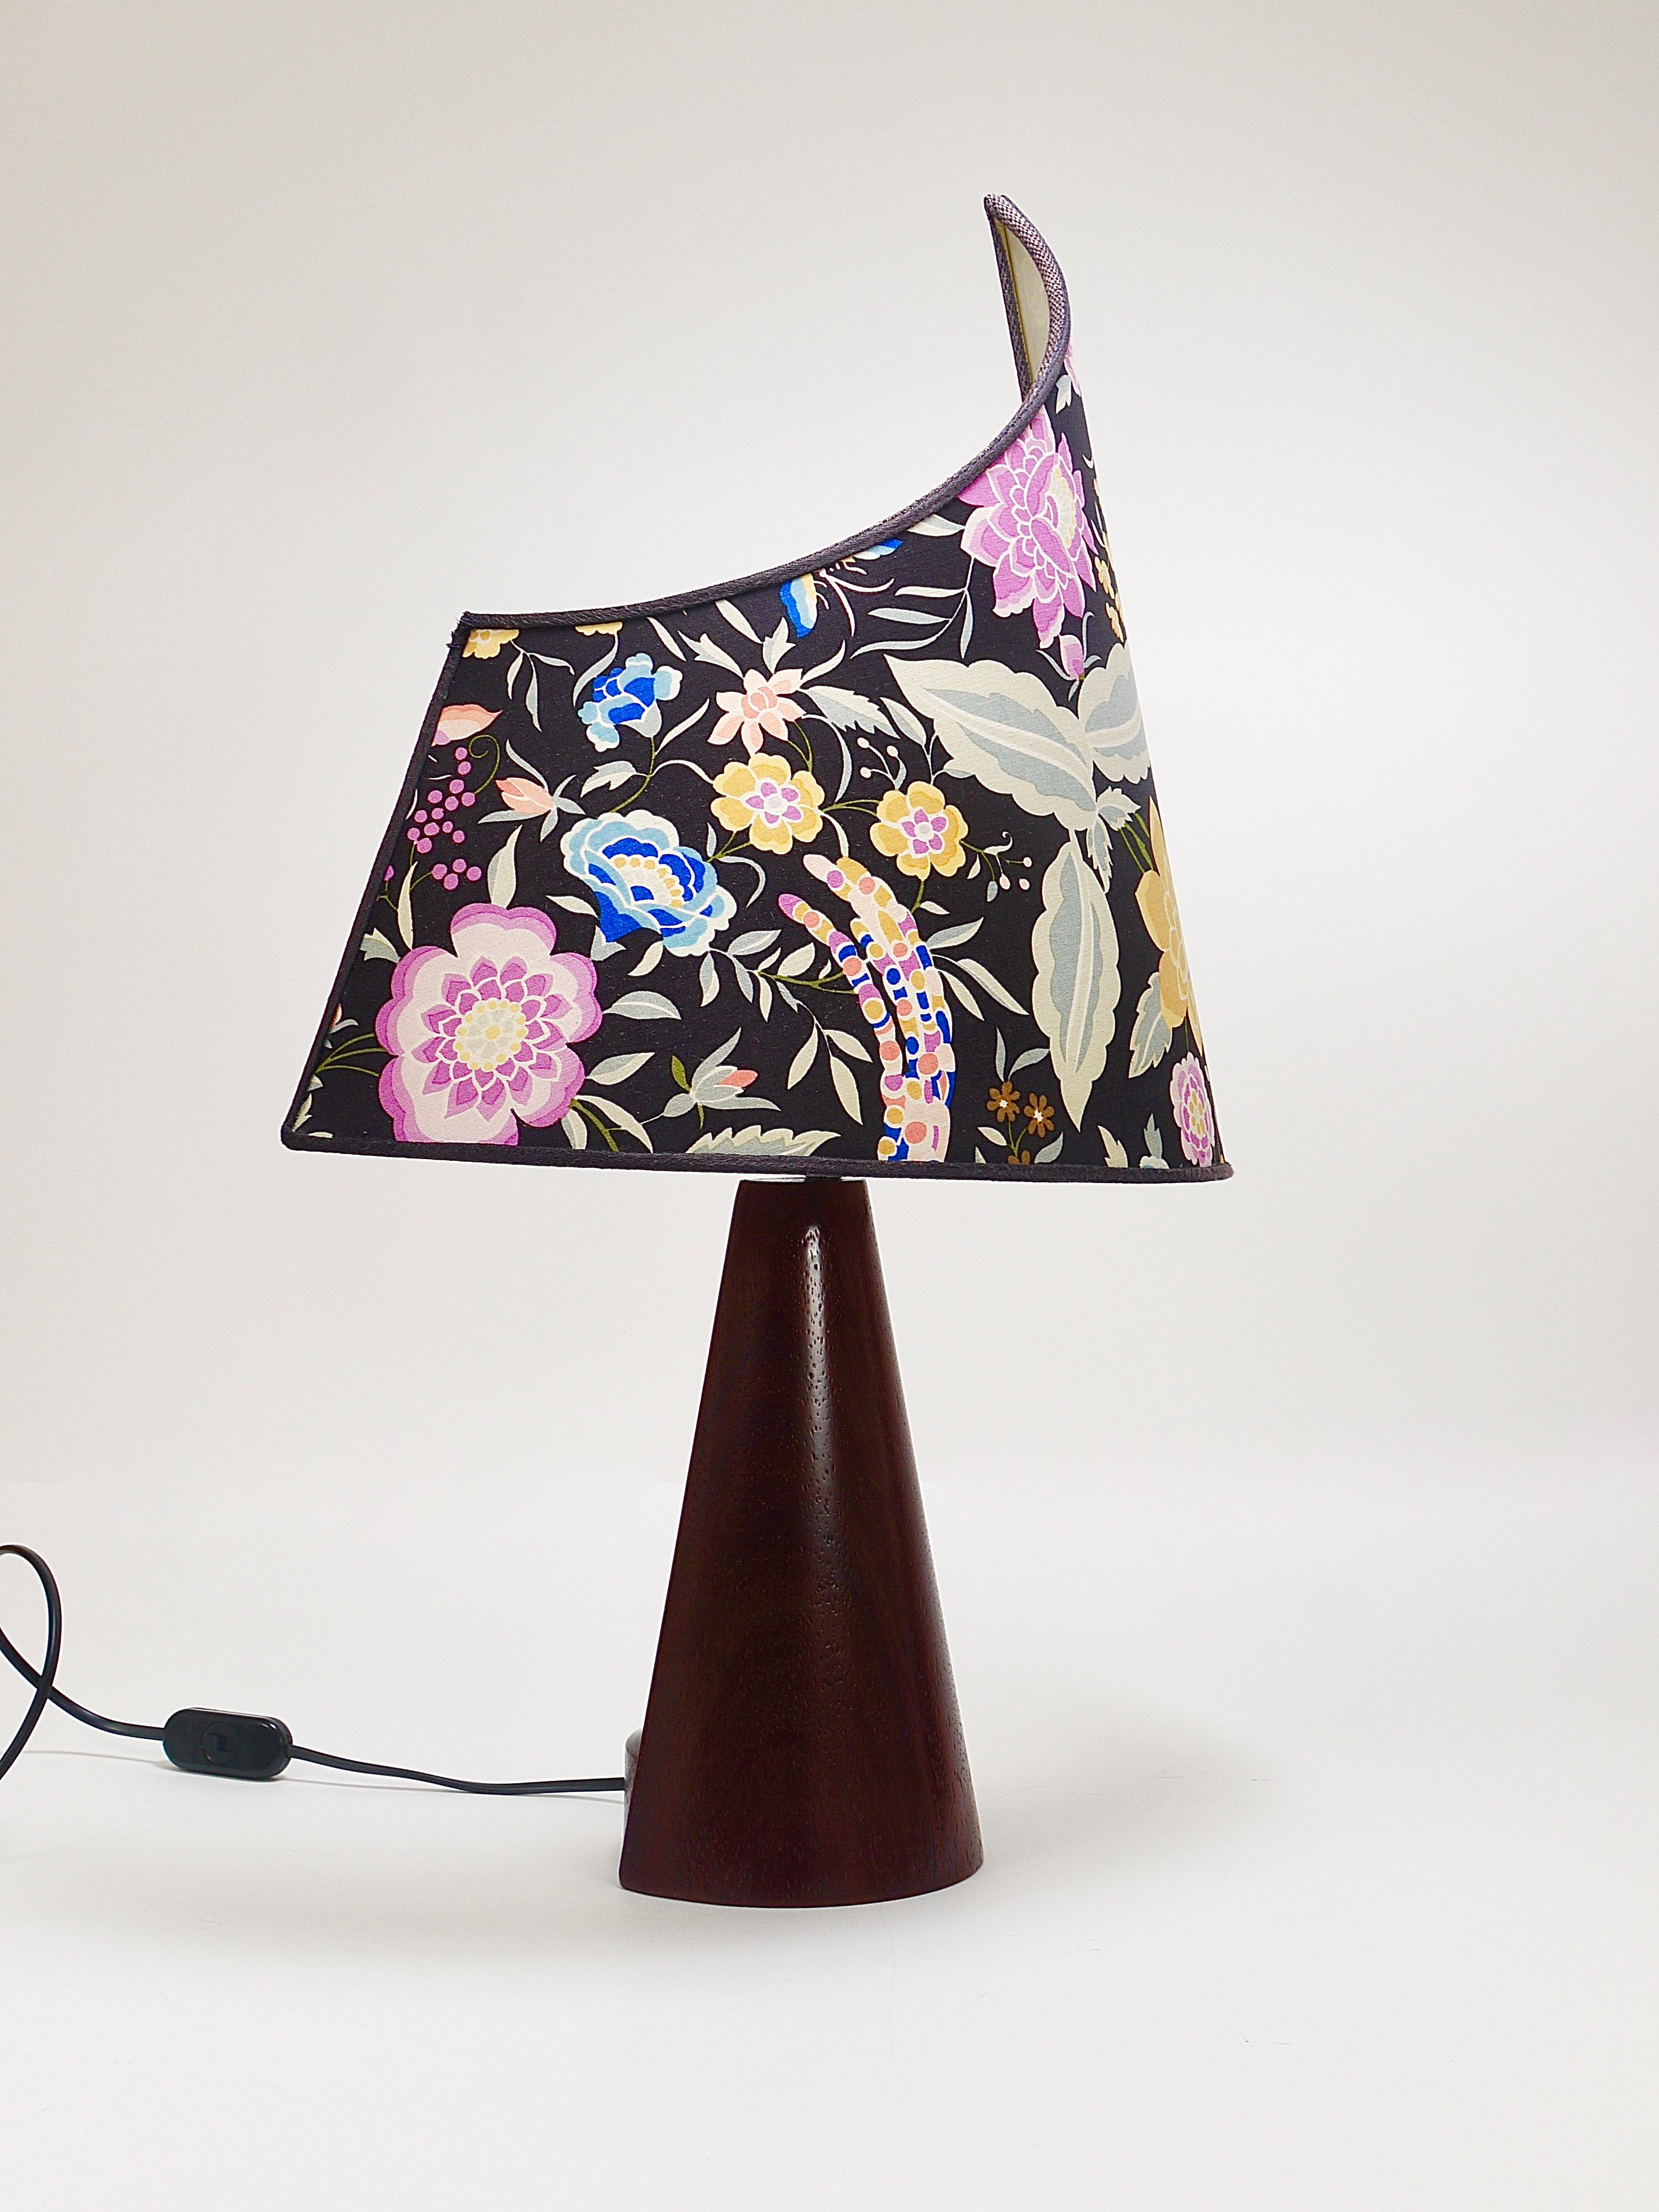 A Pair Missoni Post-Modern Table Side Lamps by Massimo Valloto, Italy, 1980s For Sale 6